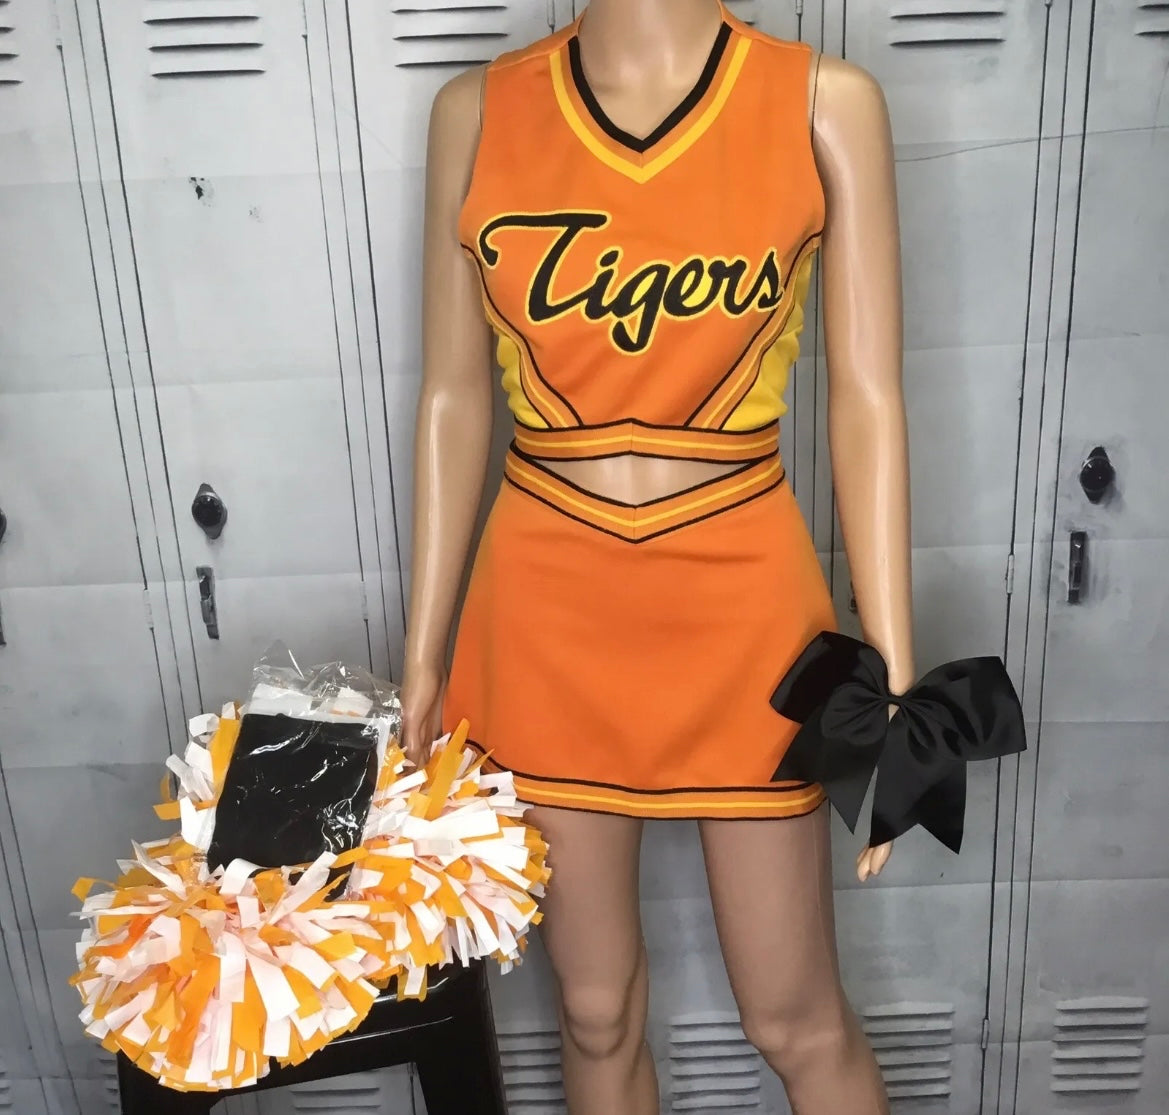 Real cheer uniform from fired up movie.  Rare